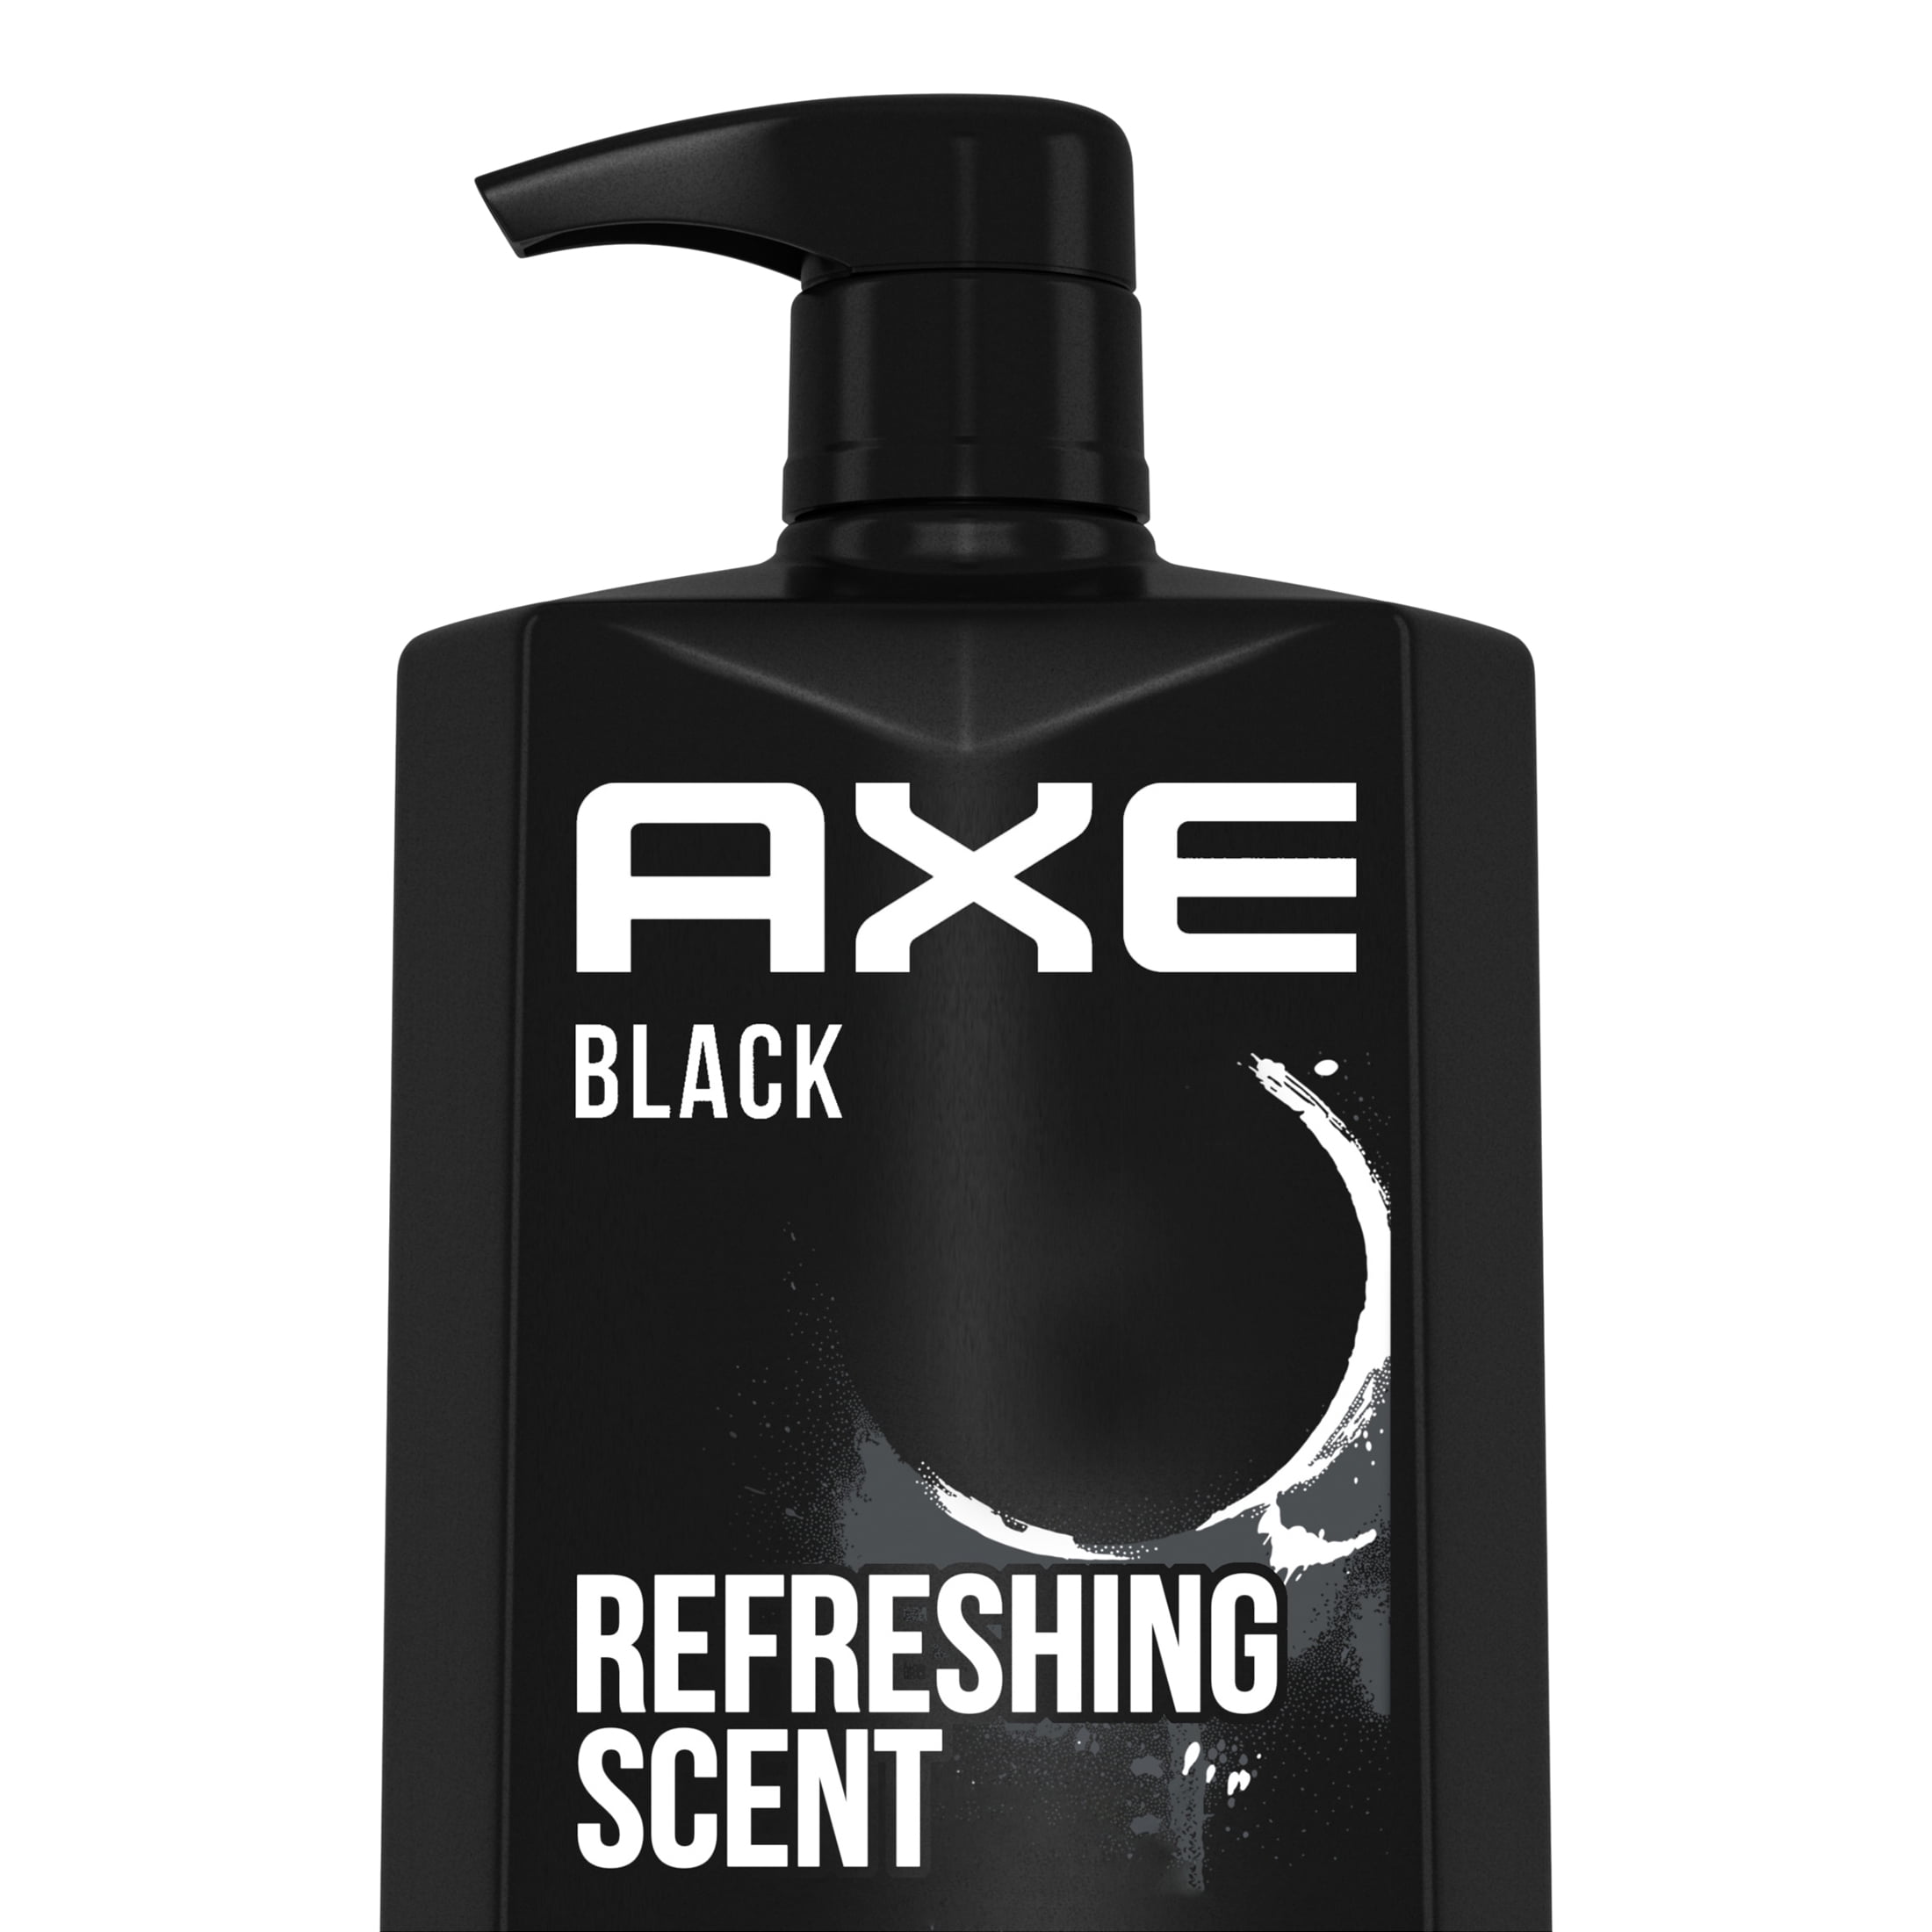 AXE Body Wash 12h Refreshing Scent Cleanser Black Frozen Pear & Cedarwood Men's Body Wash with 100% Plant-Based Moisturizers 32 oz